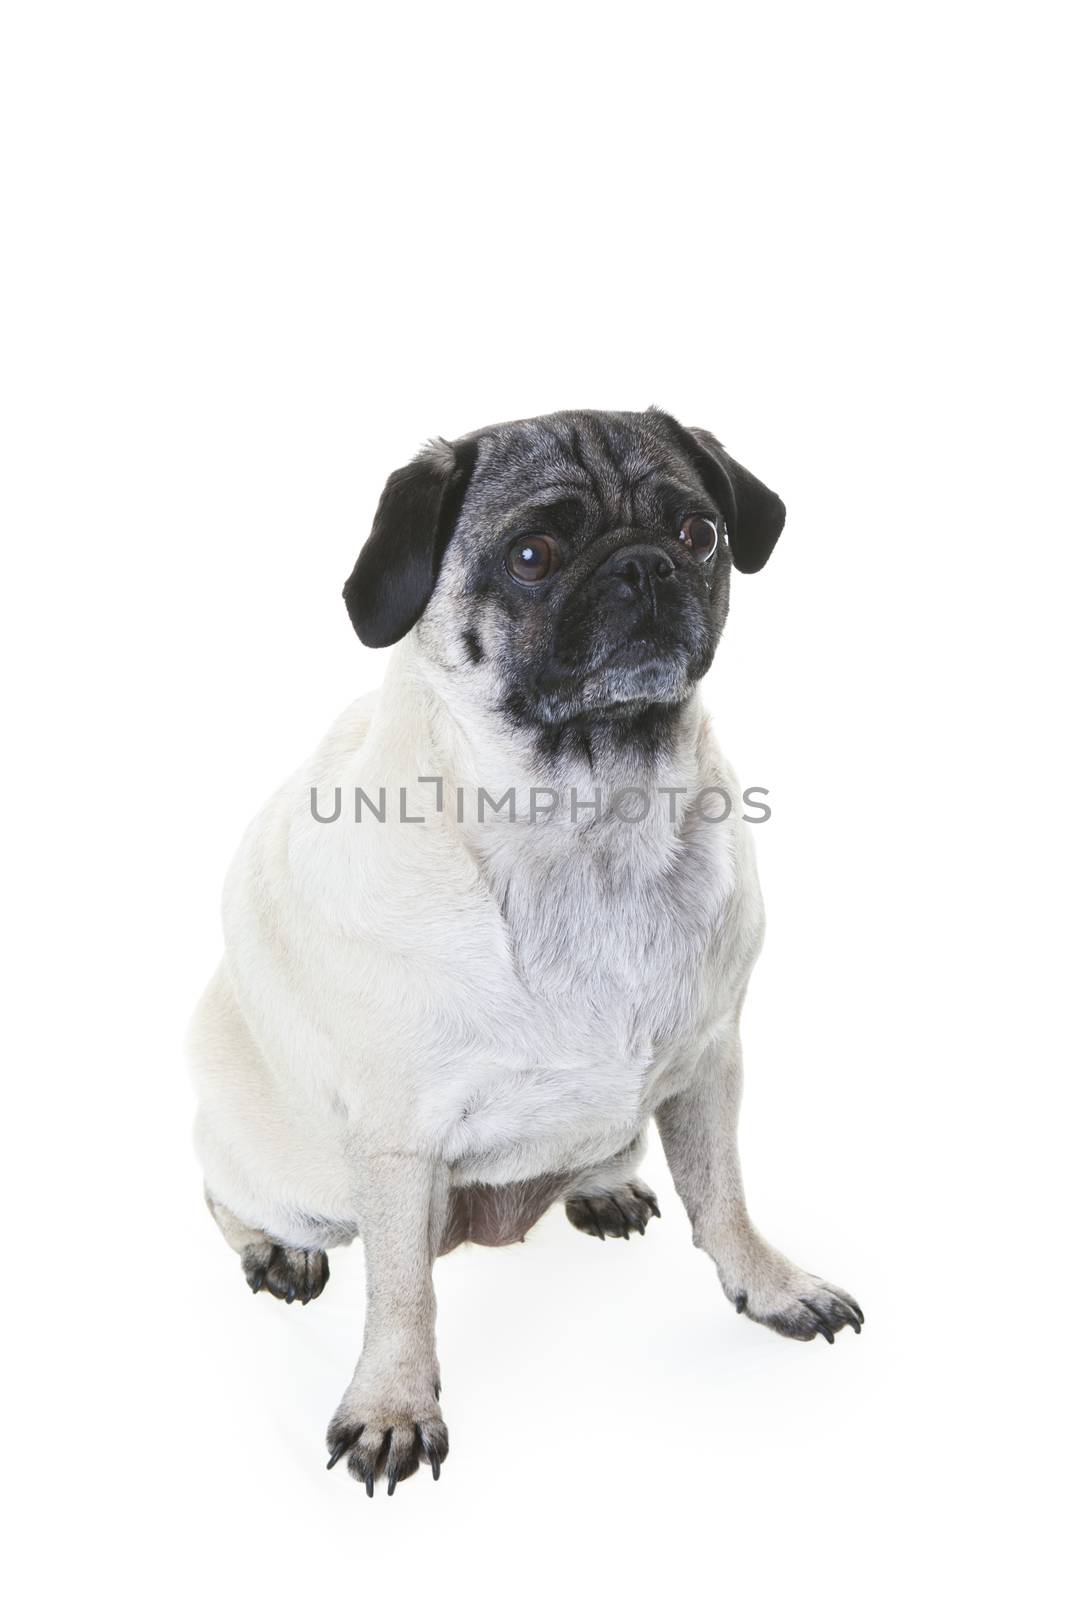 Am adorable Pug dog sitting on a white background. Slight drop shadow.